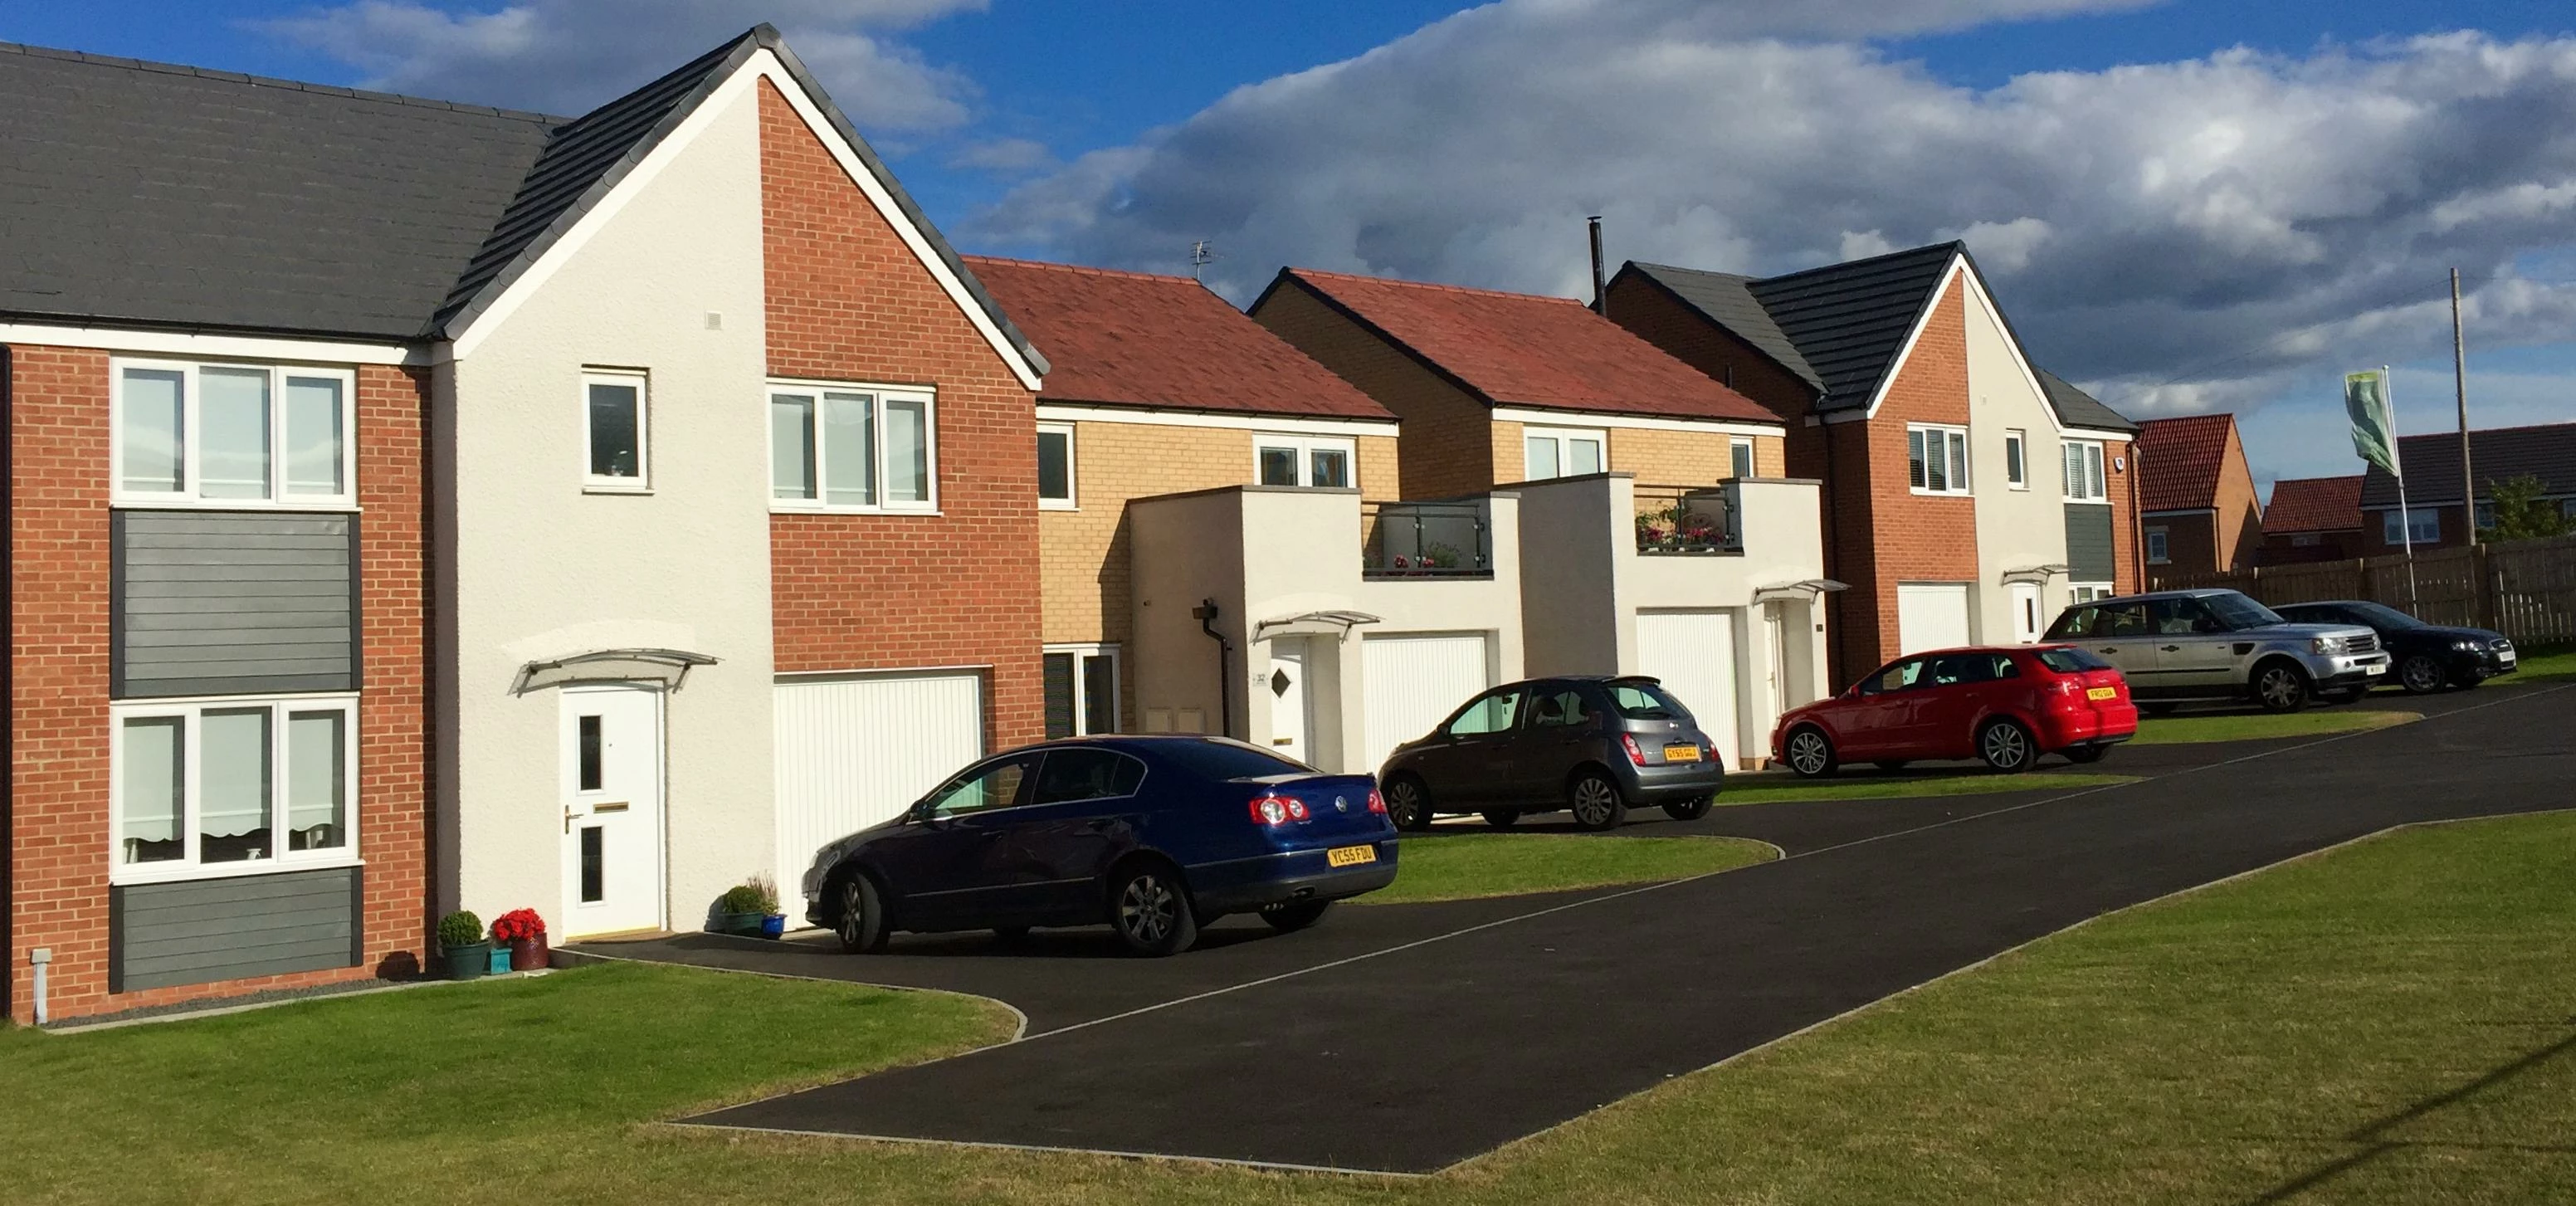 The Hawthorns is a well-established development within a few miles of Hartlepool town centre.